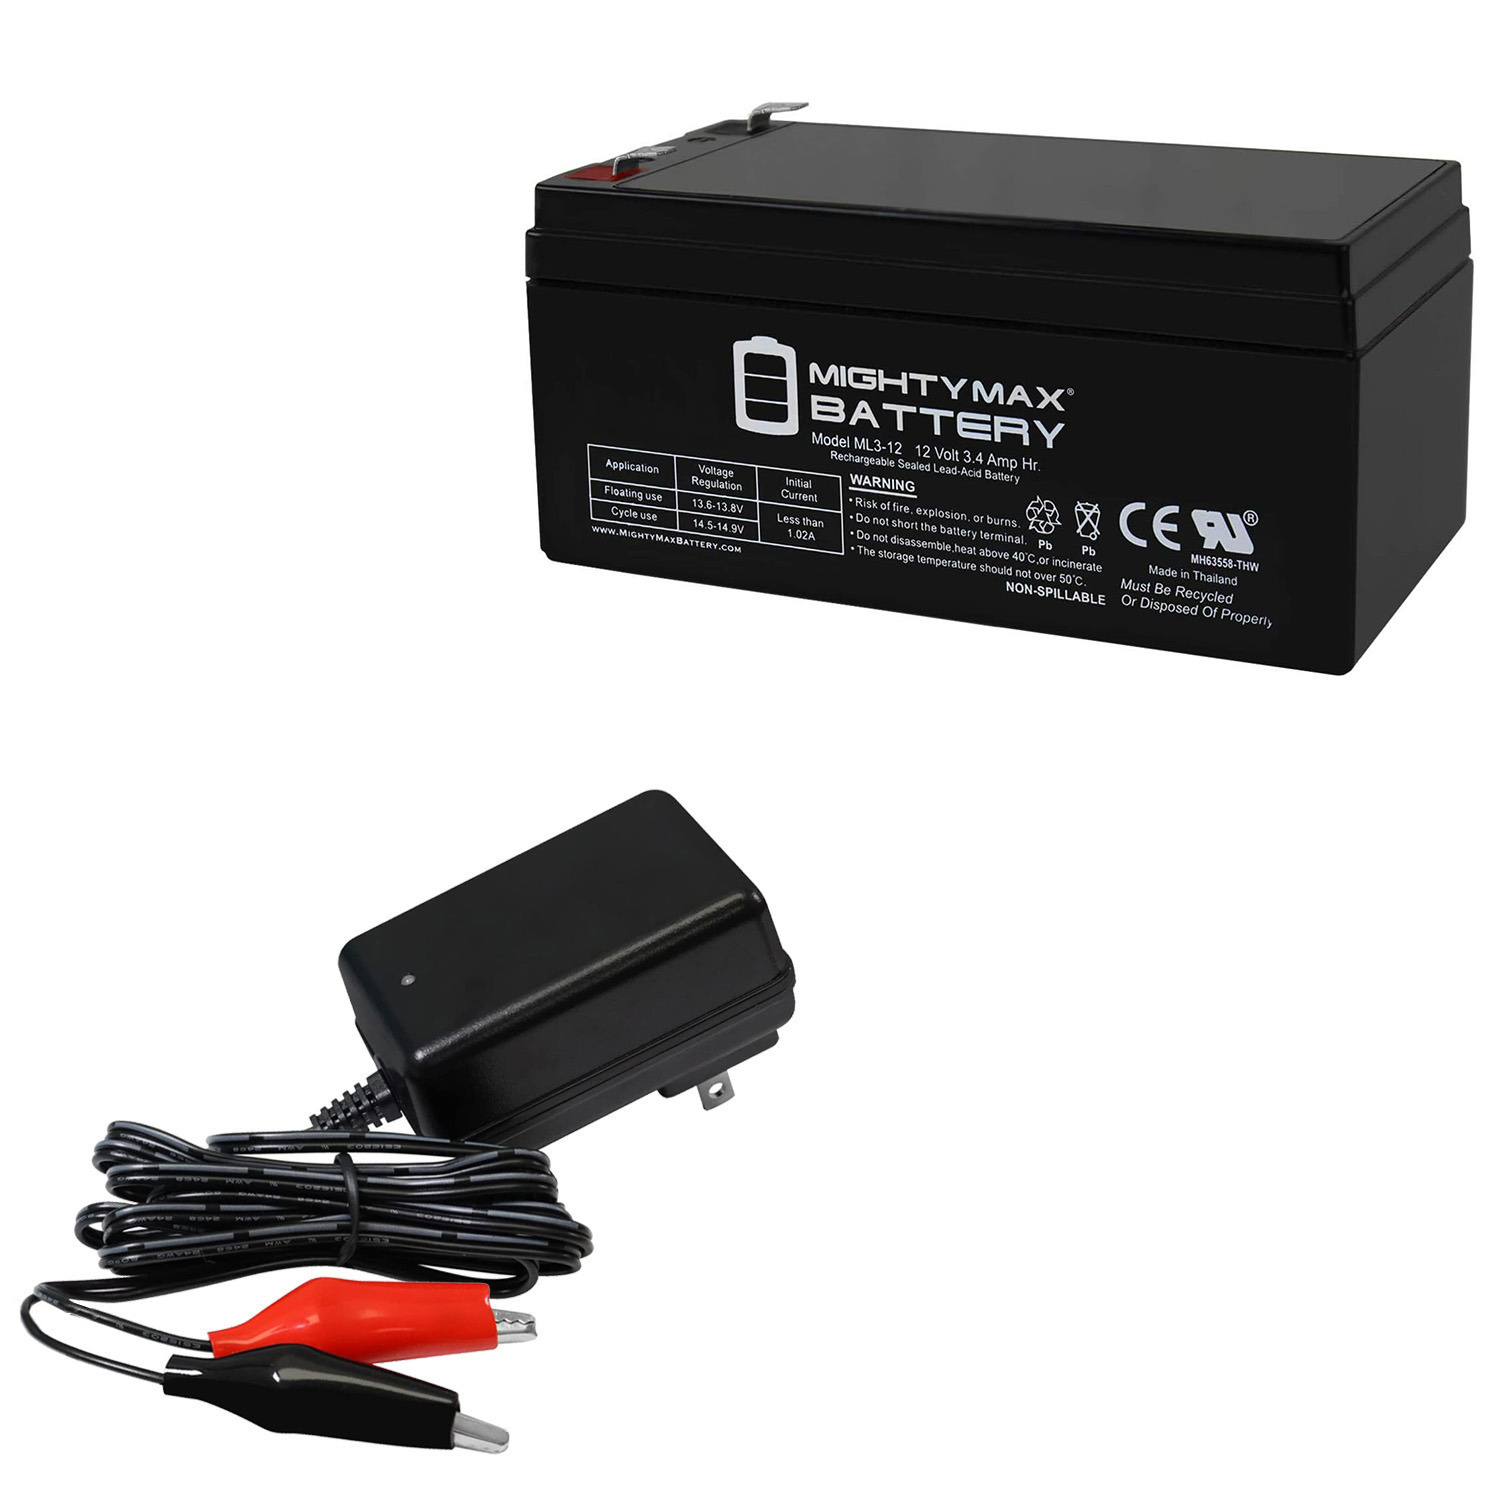 Mighty Max Battery ML3-12 12V 3.4AH Replaces Toy Car Play Mobile Scooter + 12V Charger